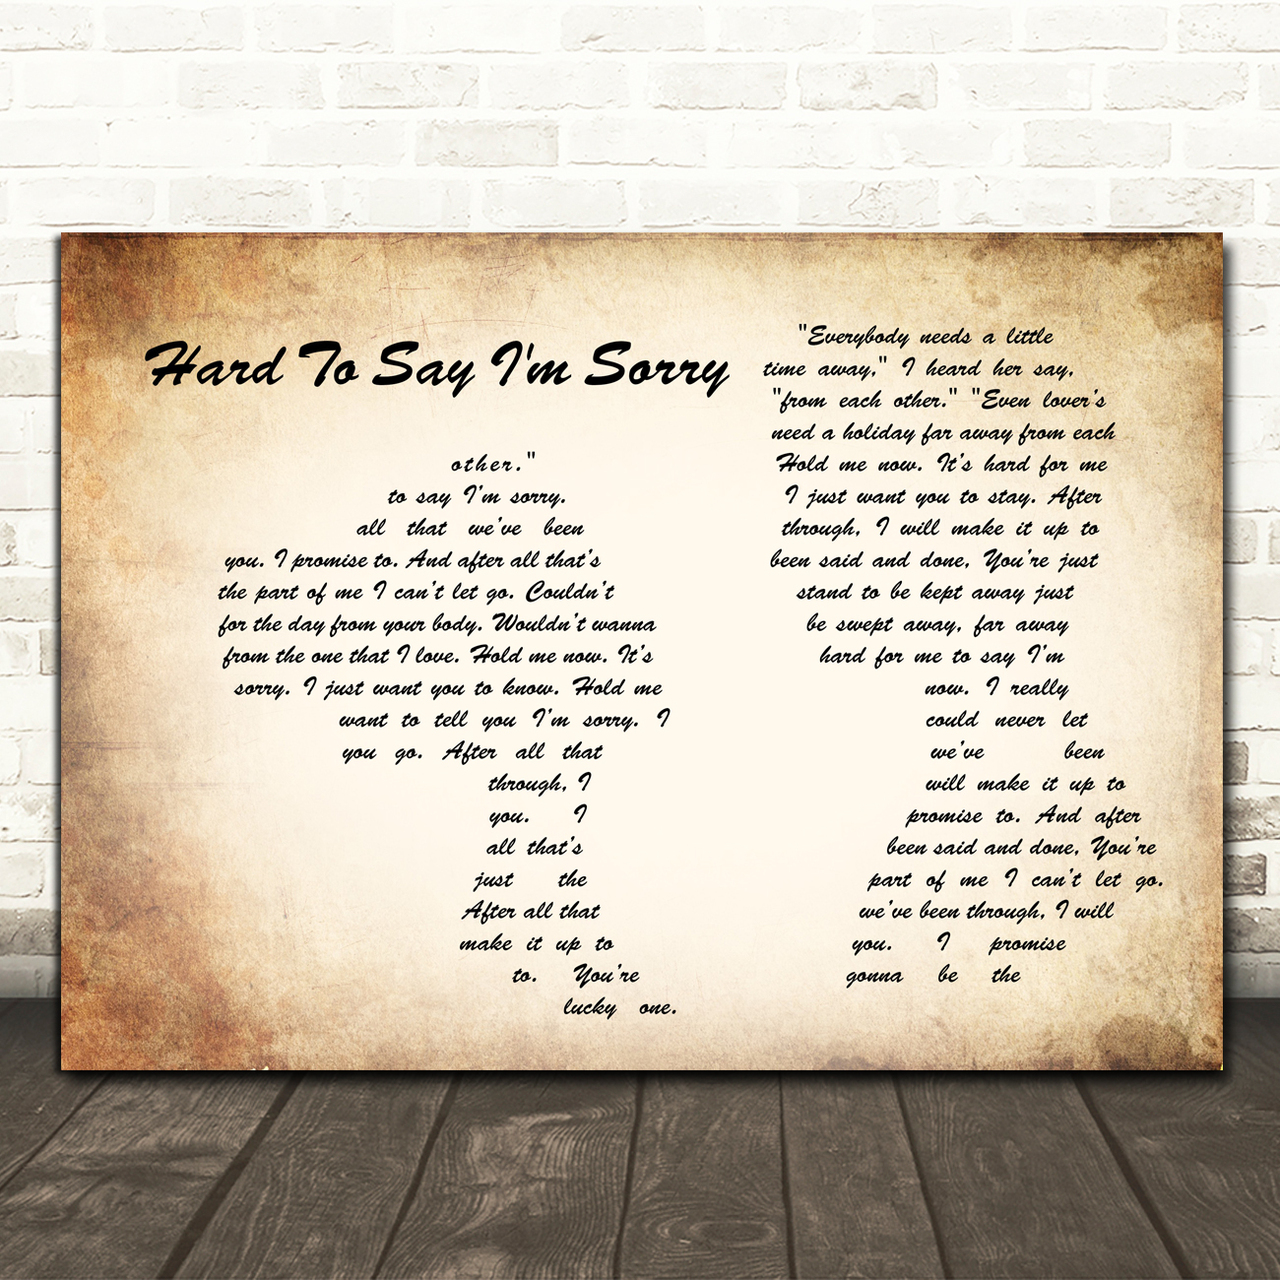 Chicago Hard To Say I'm Sorry Man Lady Couple Song Lyric Wall Art Print